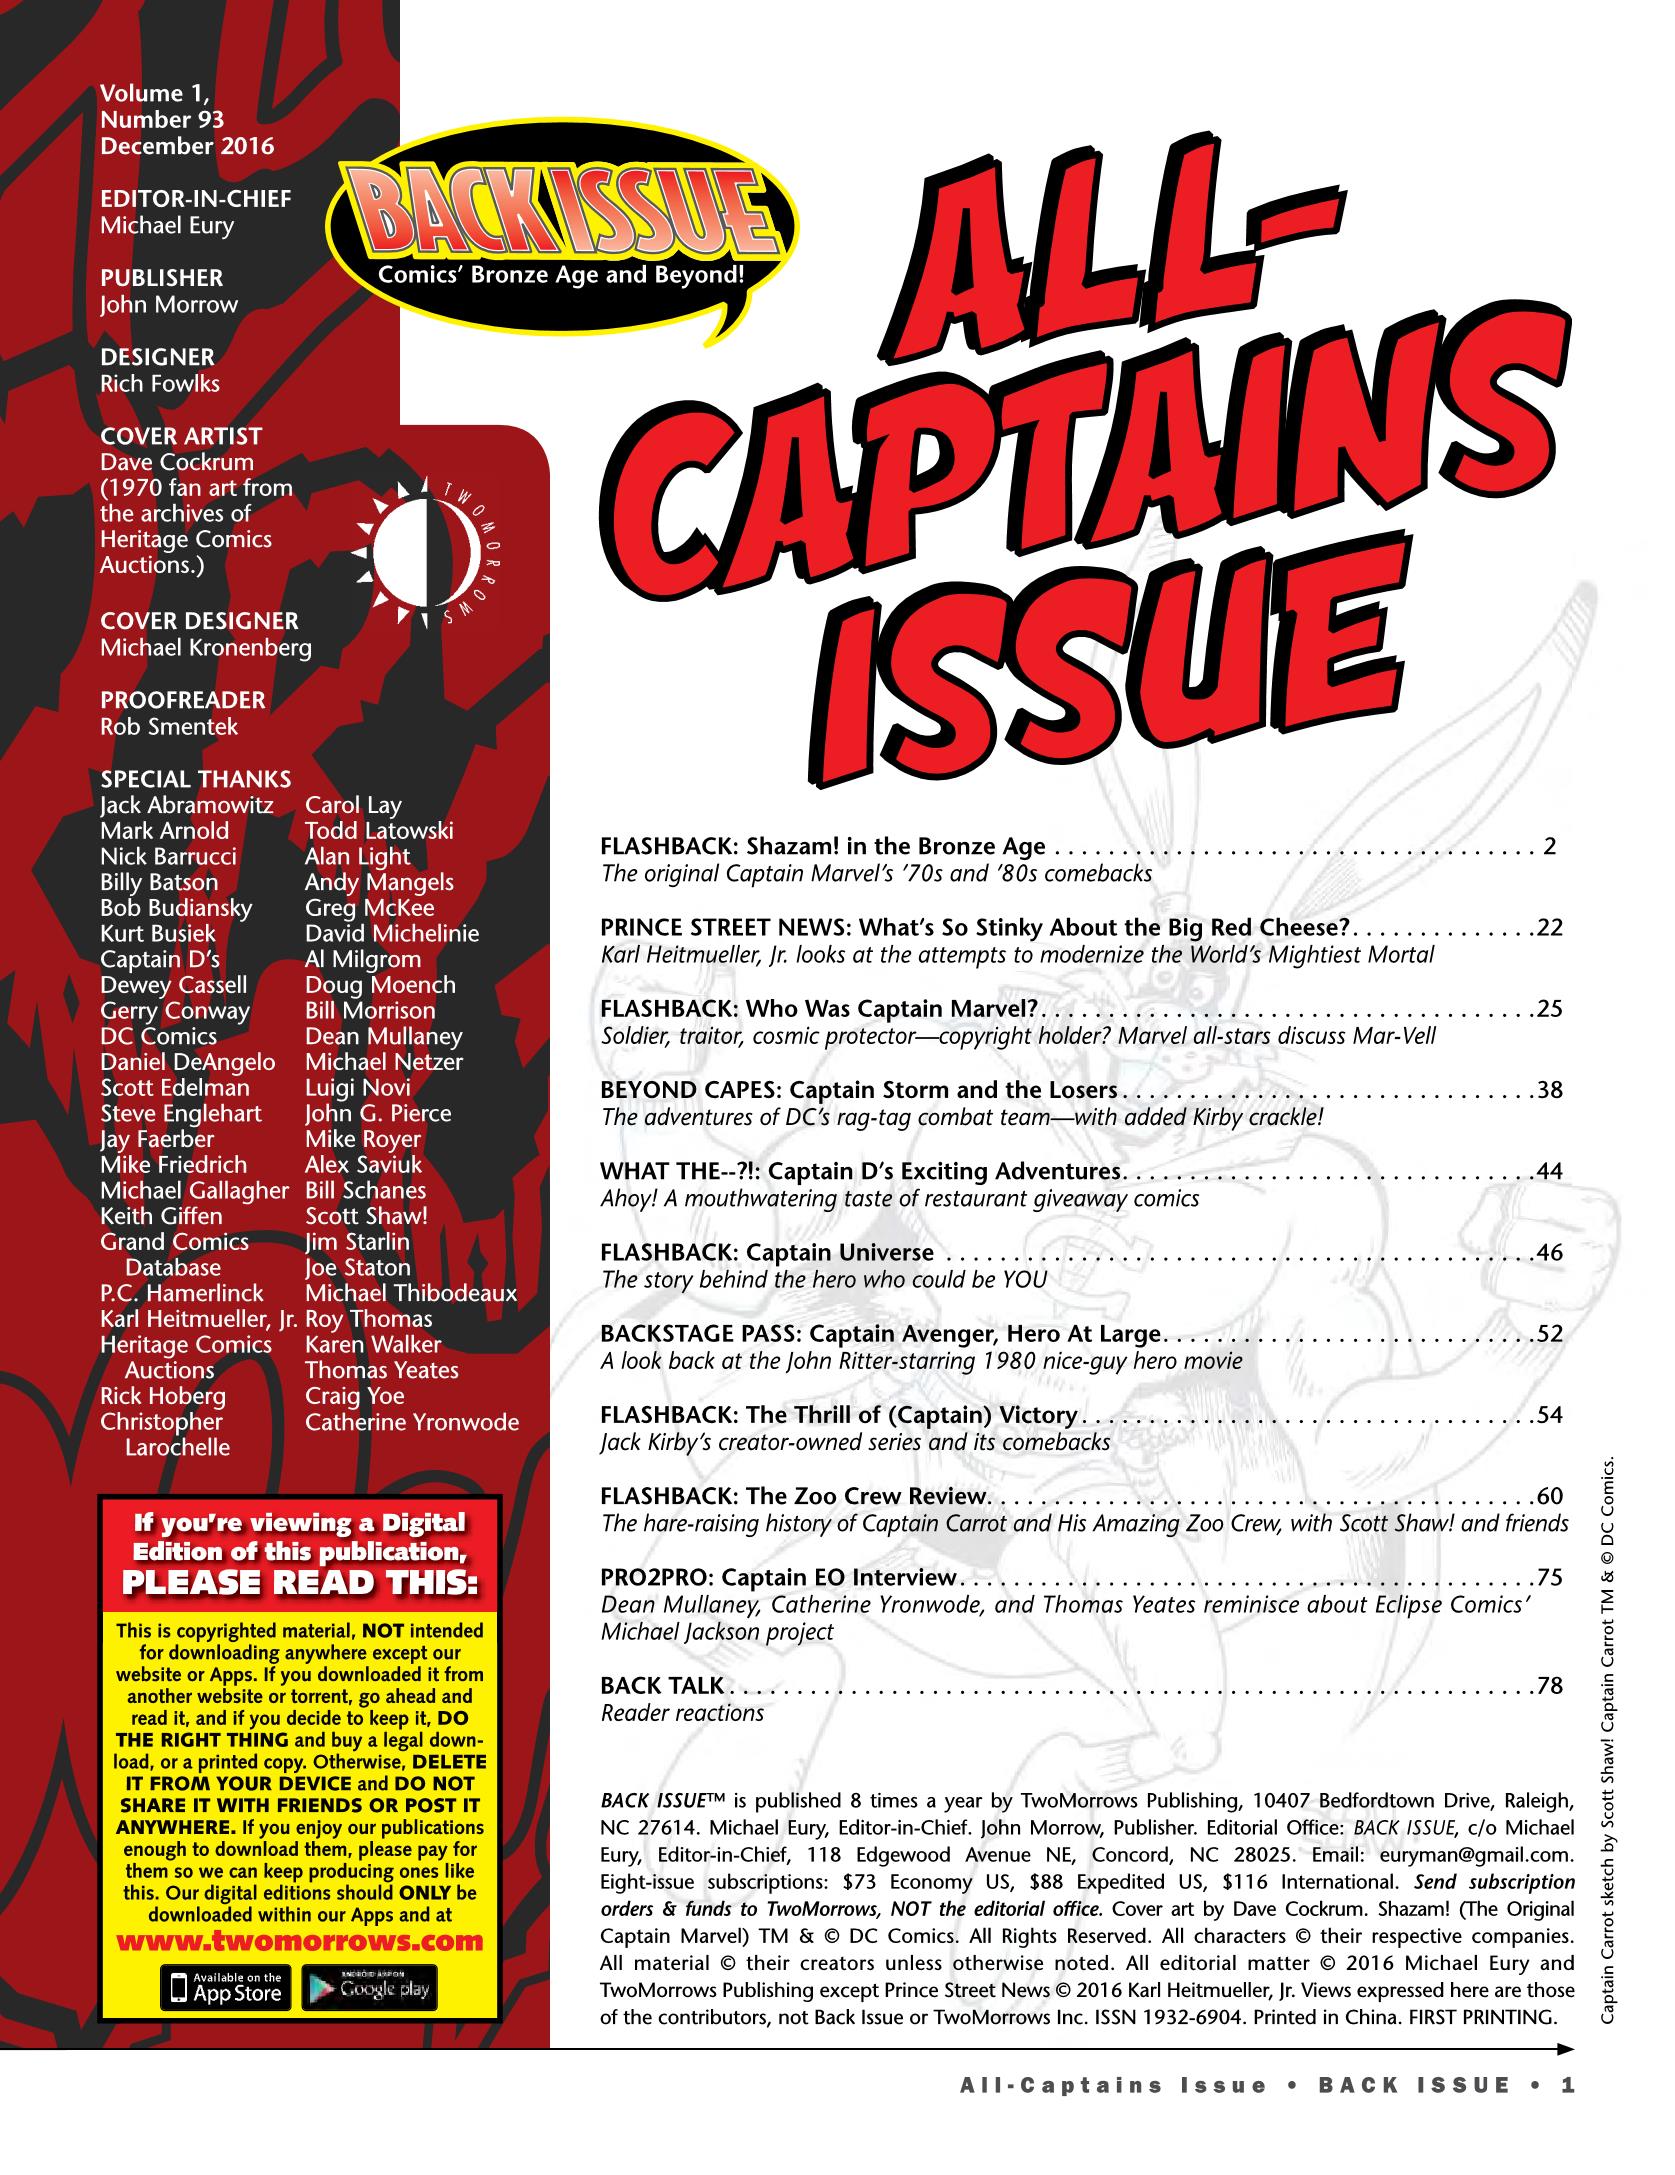 Read online Back Issue comic -  Issue #93 - 23